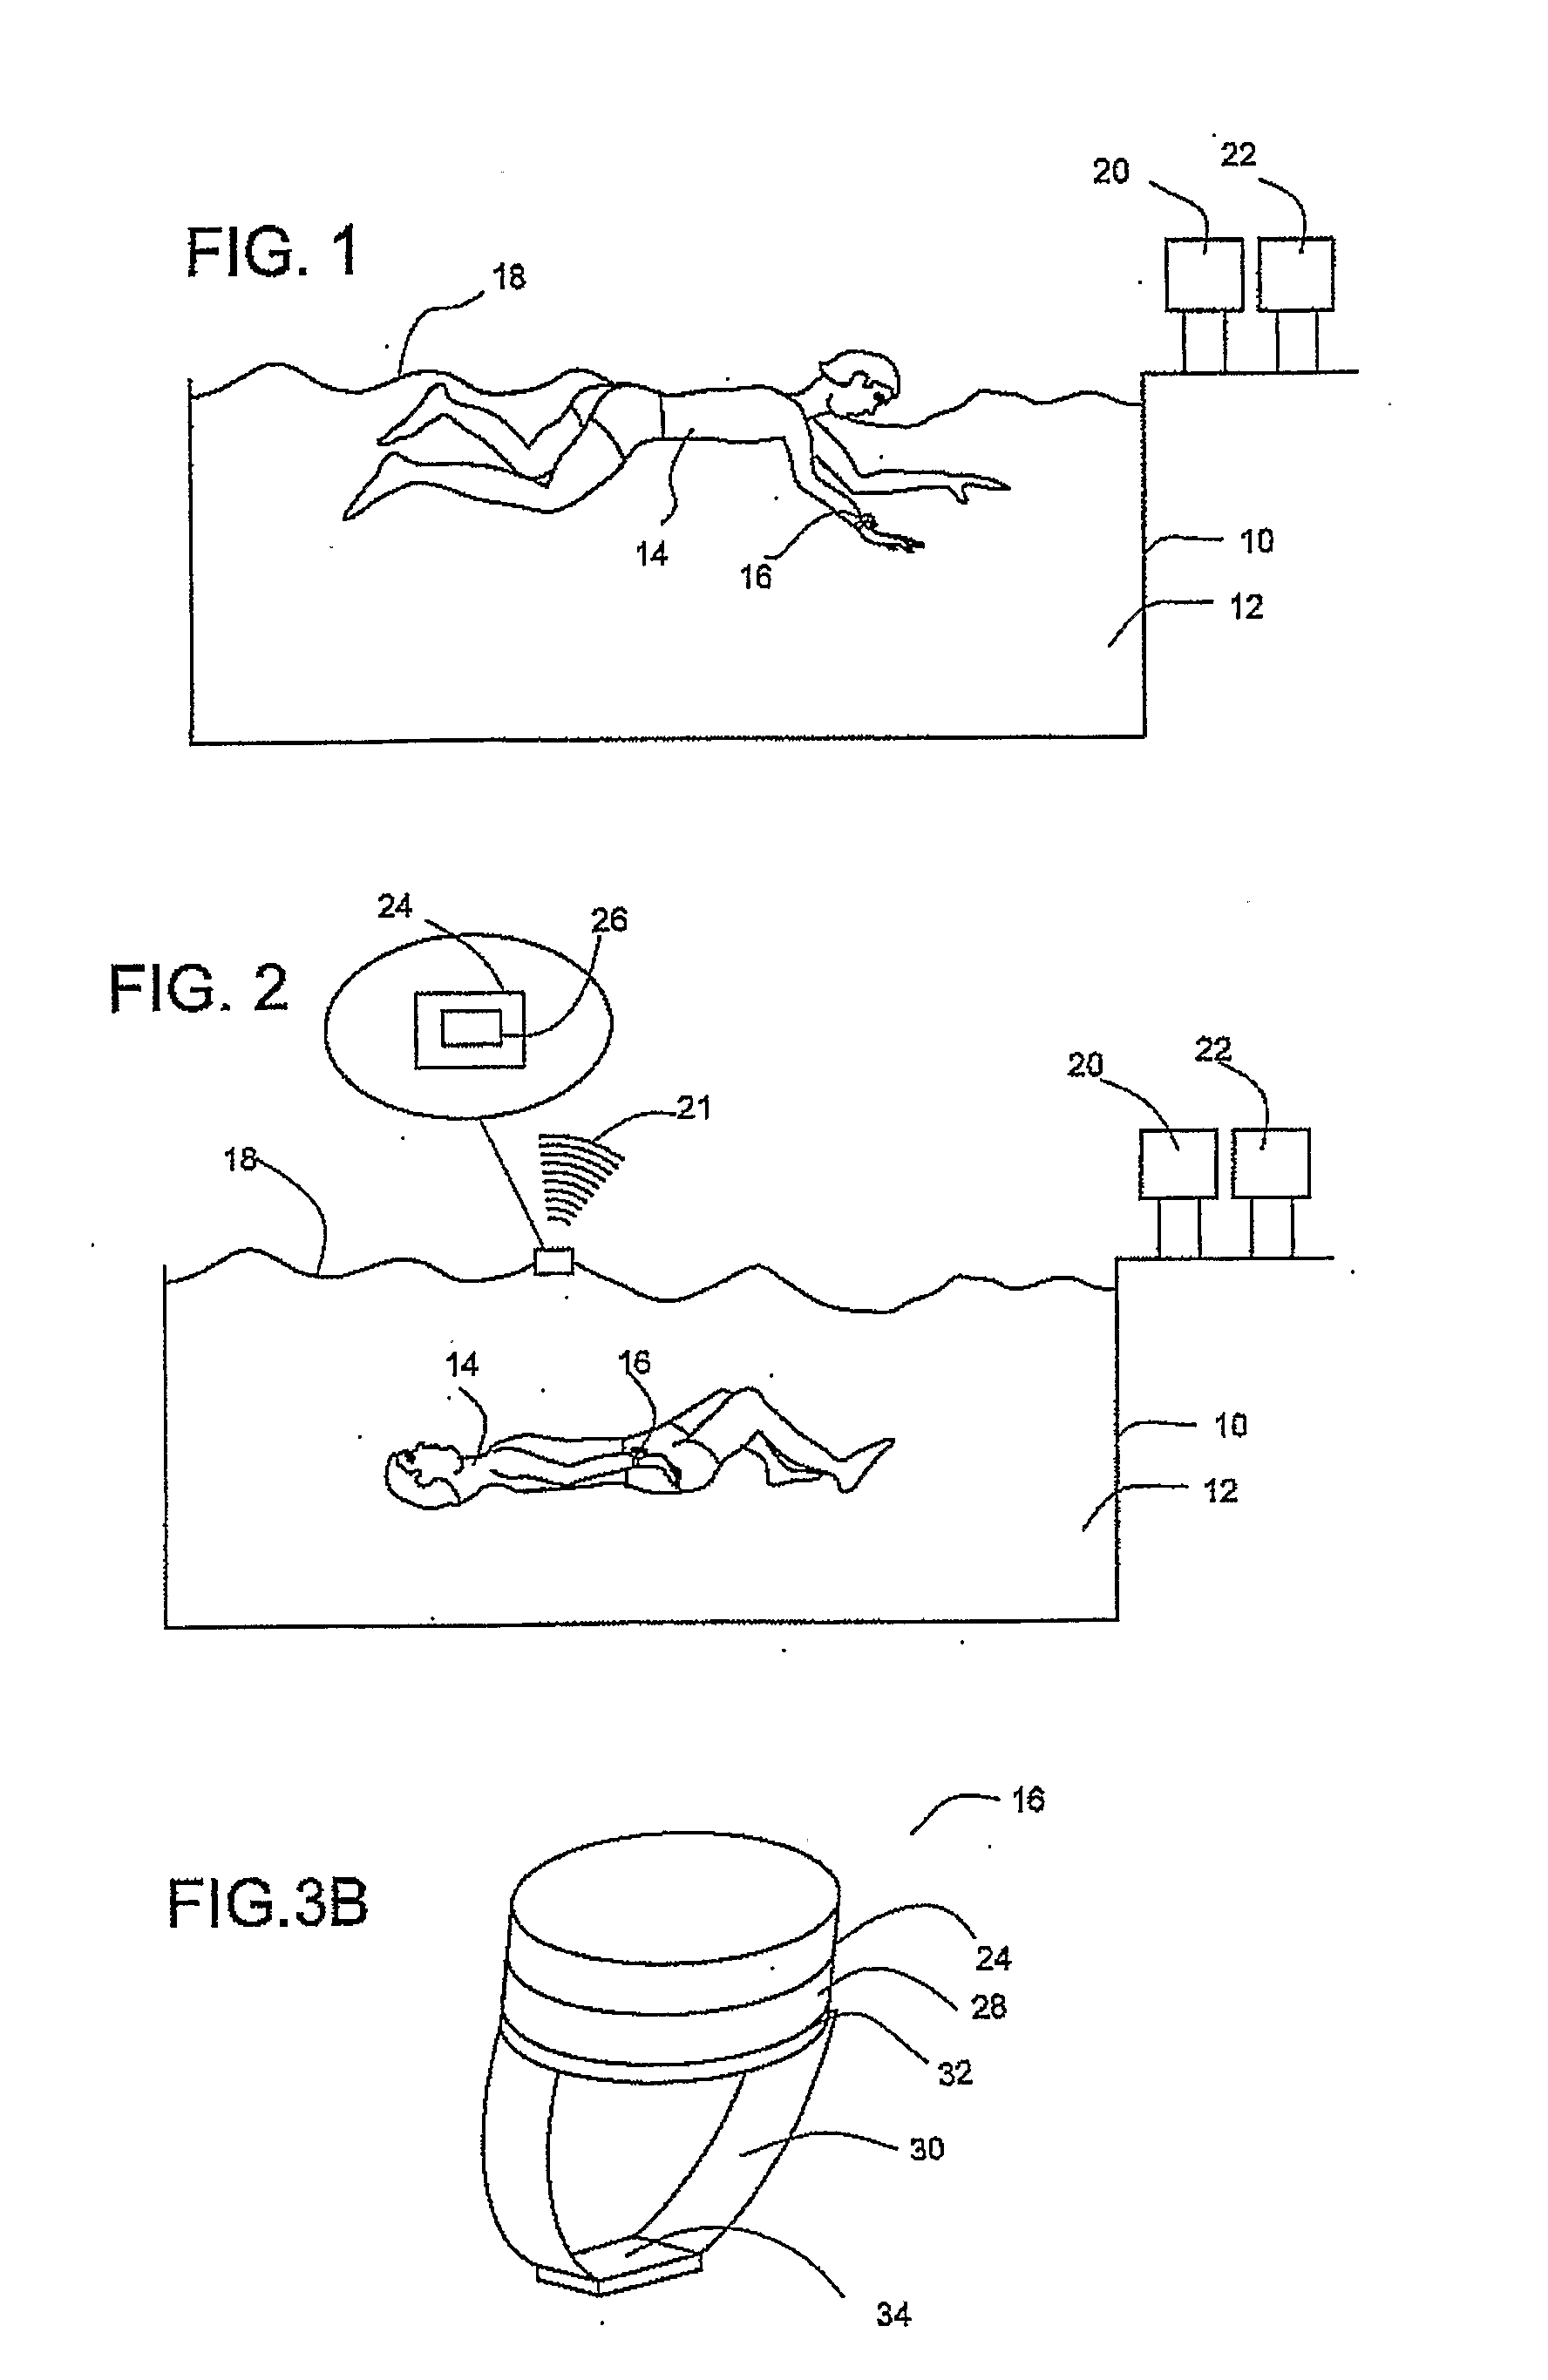 Apparatus and Method for The Detection of a Subject in Drowning or Near-Drowning Situation